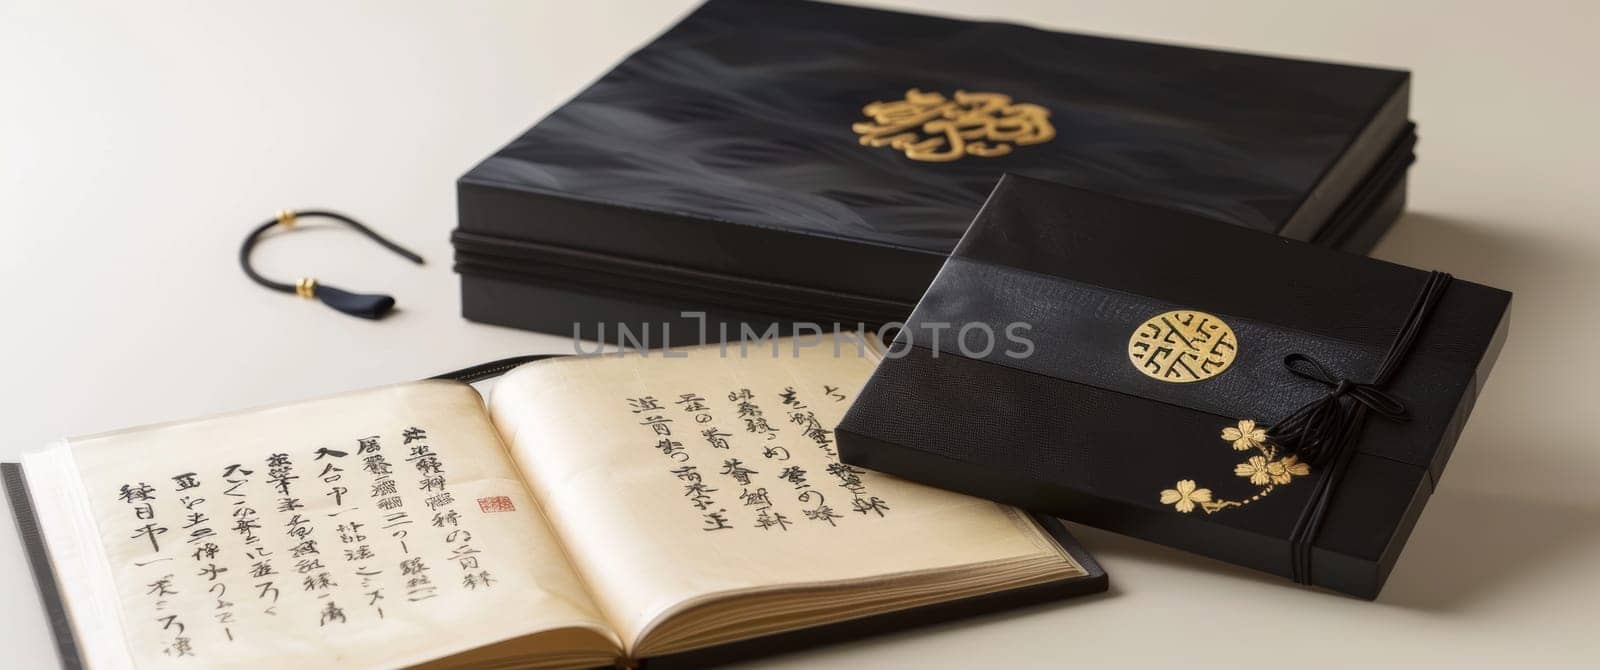 Open calligraphy books alongside a black case, showcasing Japans revered practice of written expression